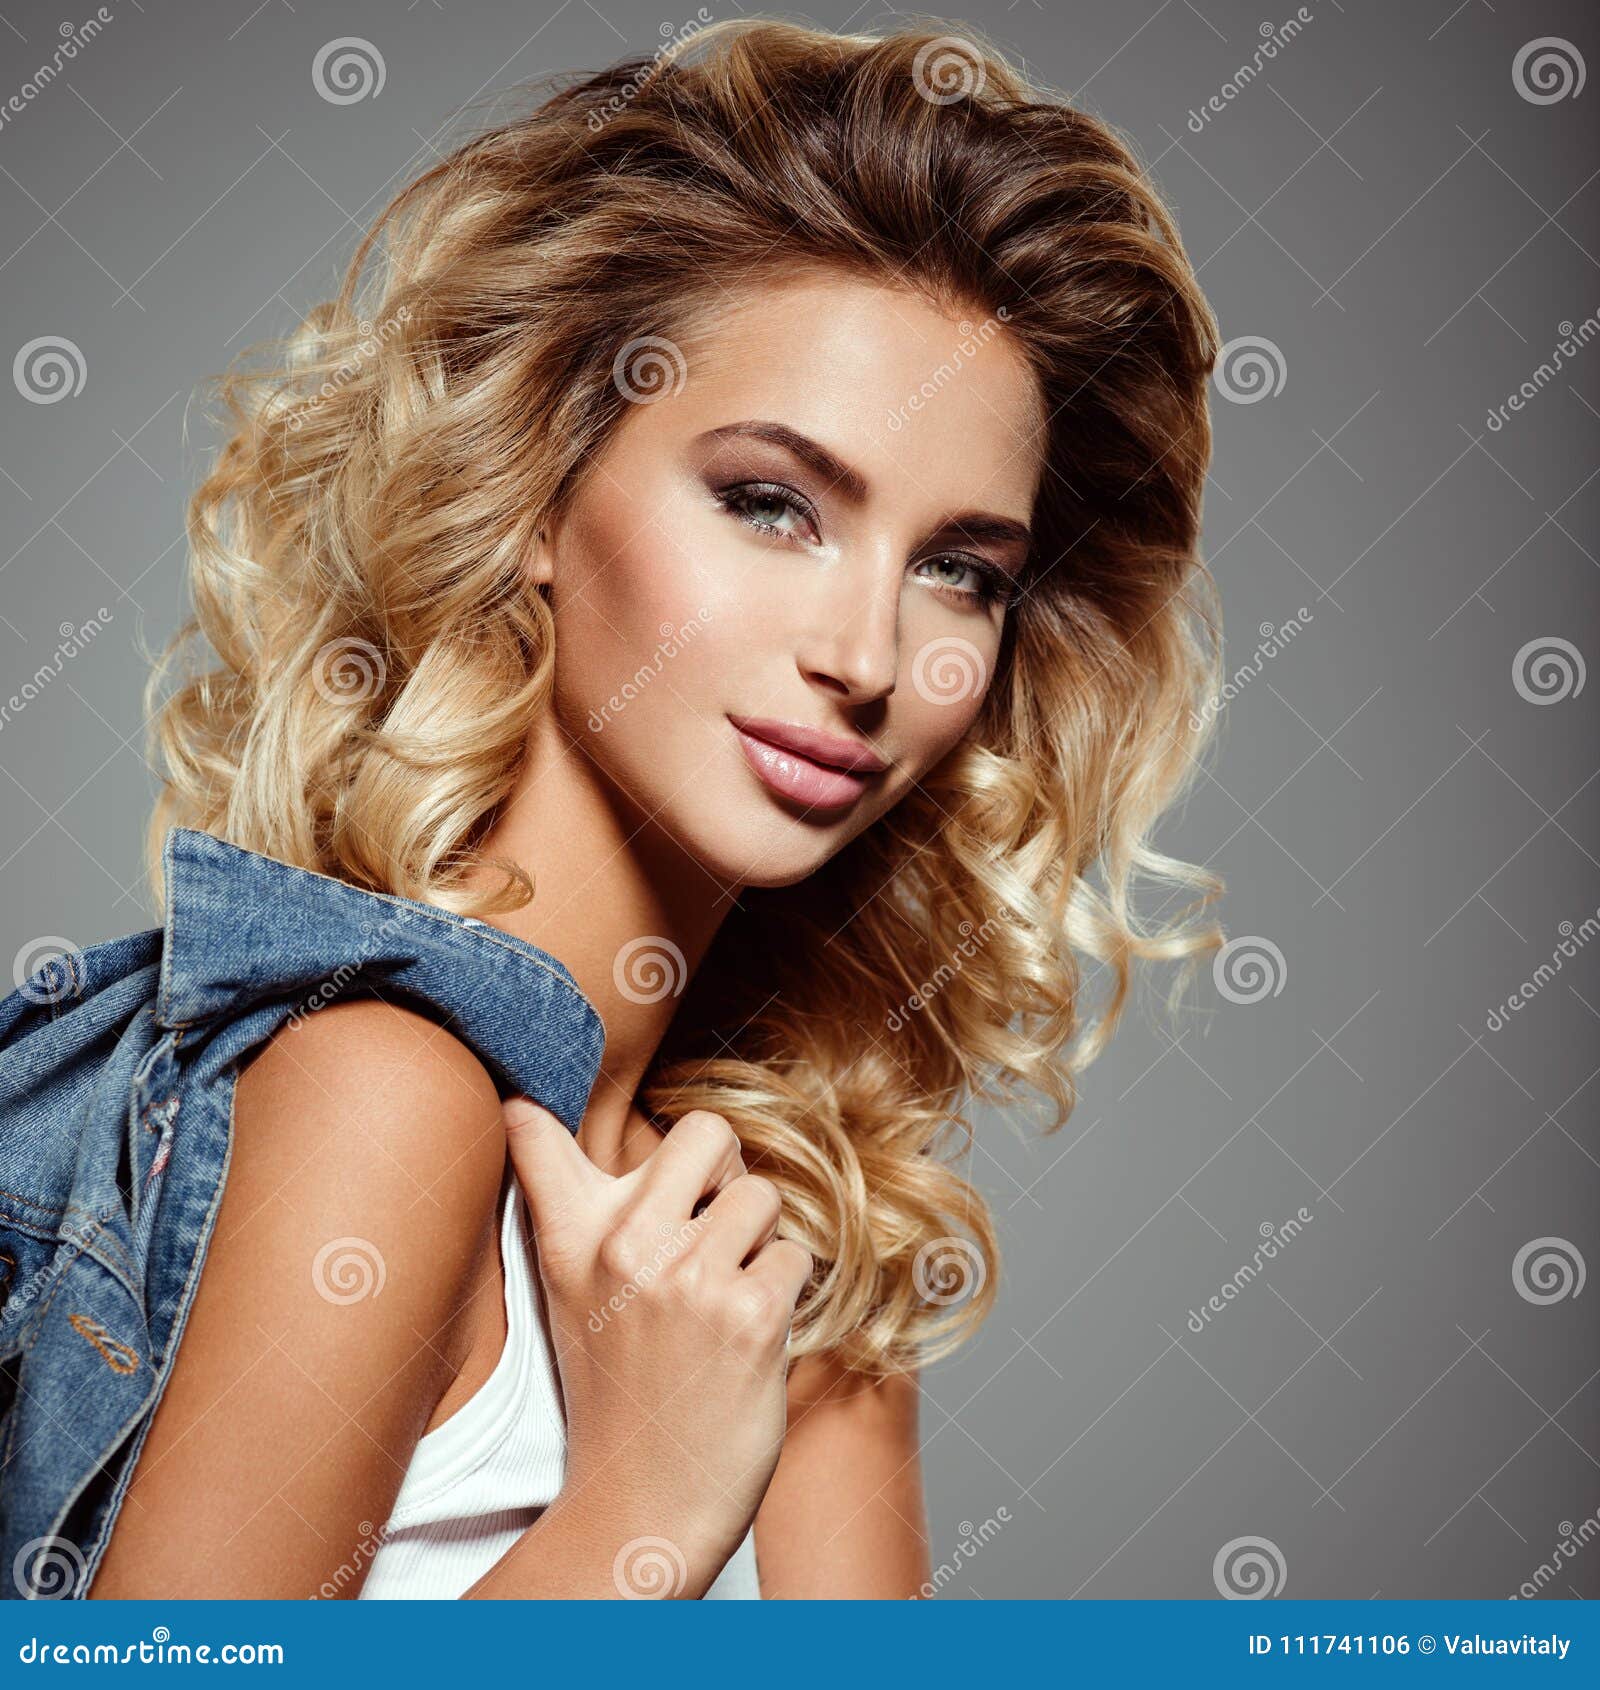 Photo of a Beautiful Young Blond Girl with Curly Hair Stock Photo ...